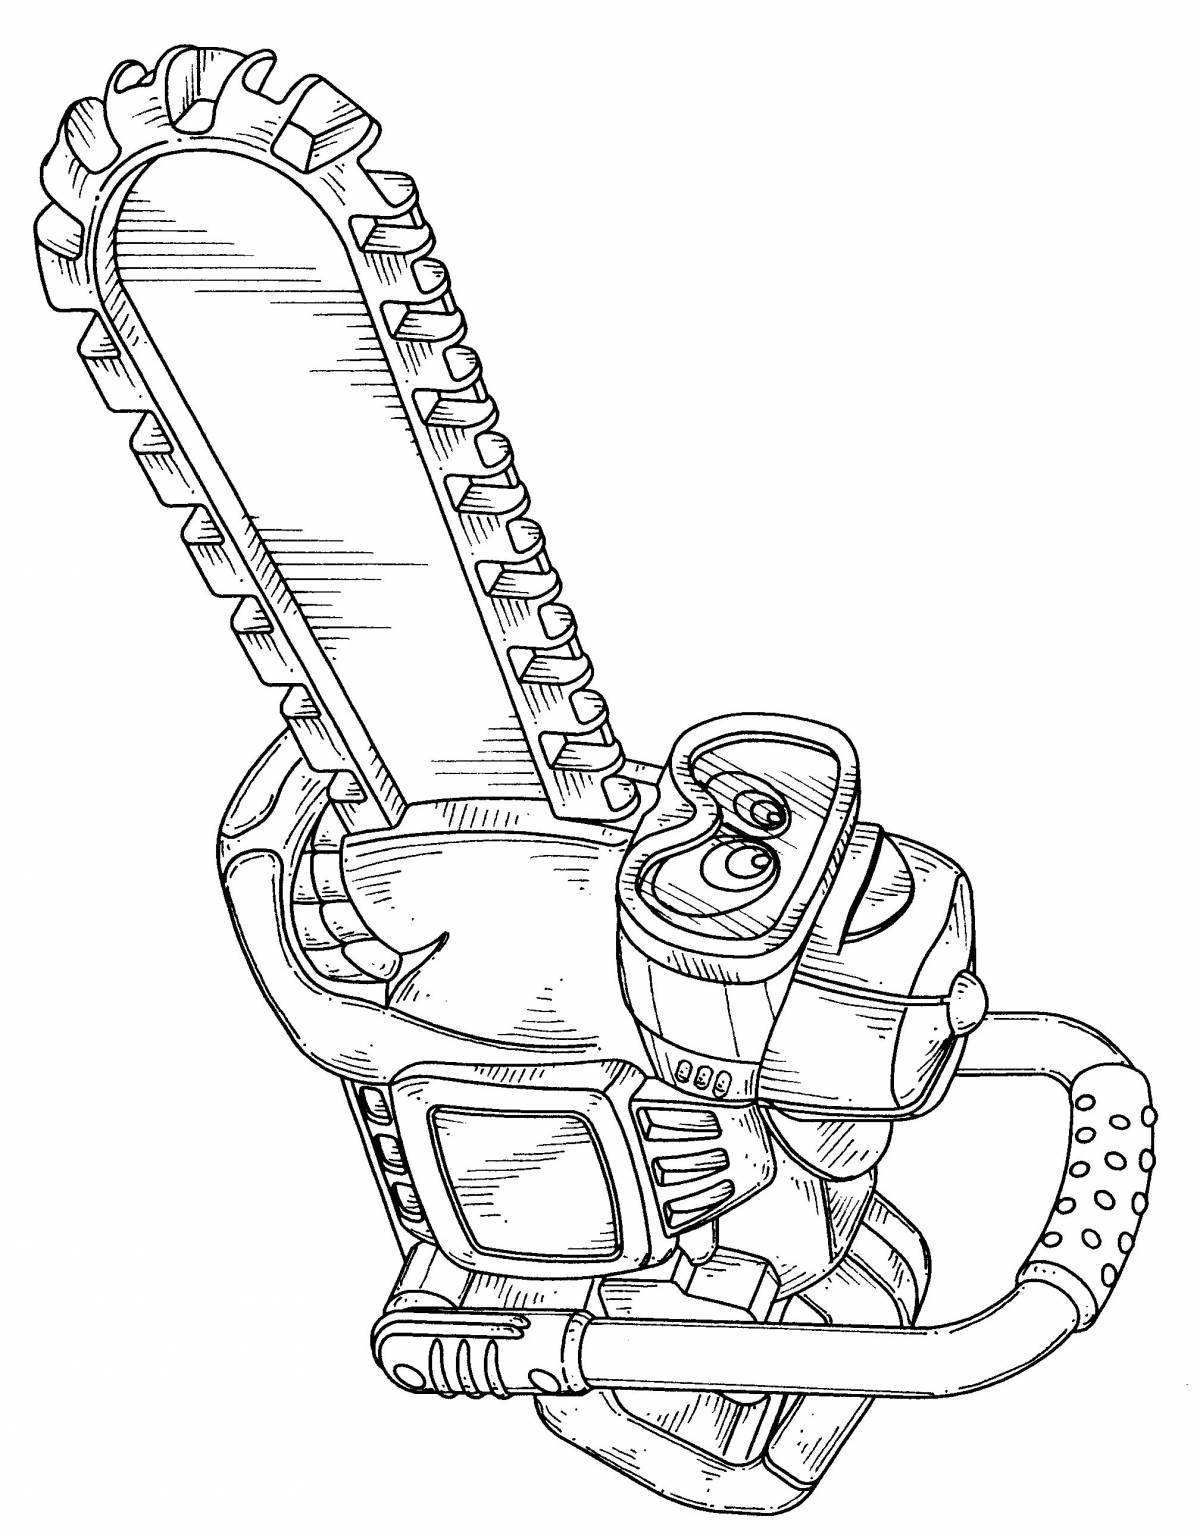 Chainsaw Exciting Coloring Page